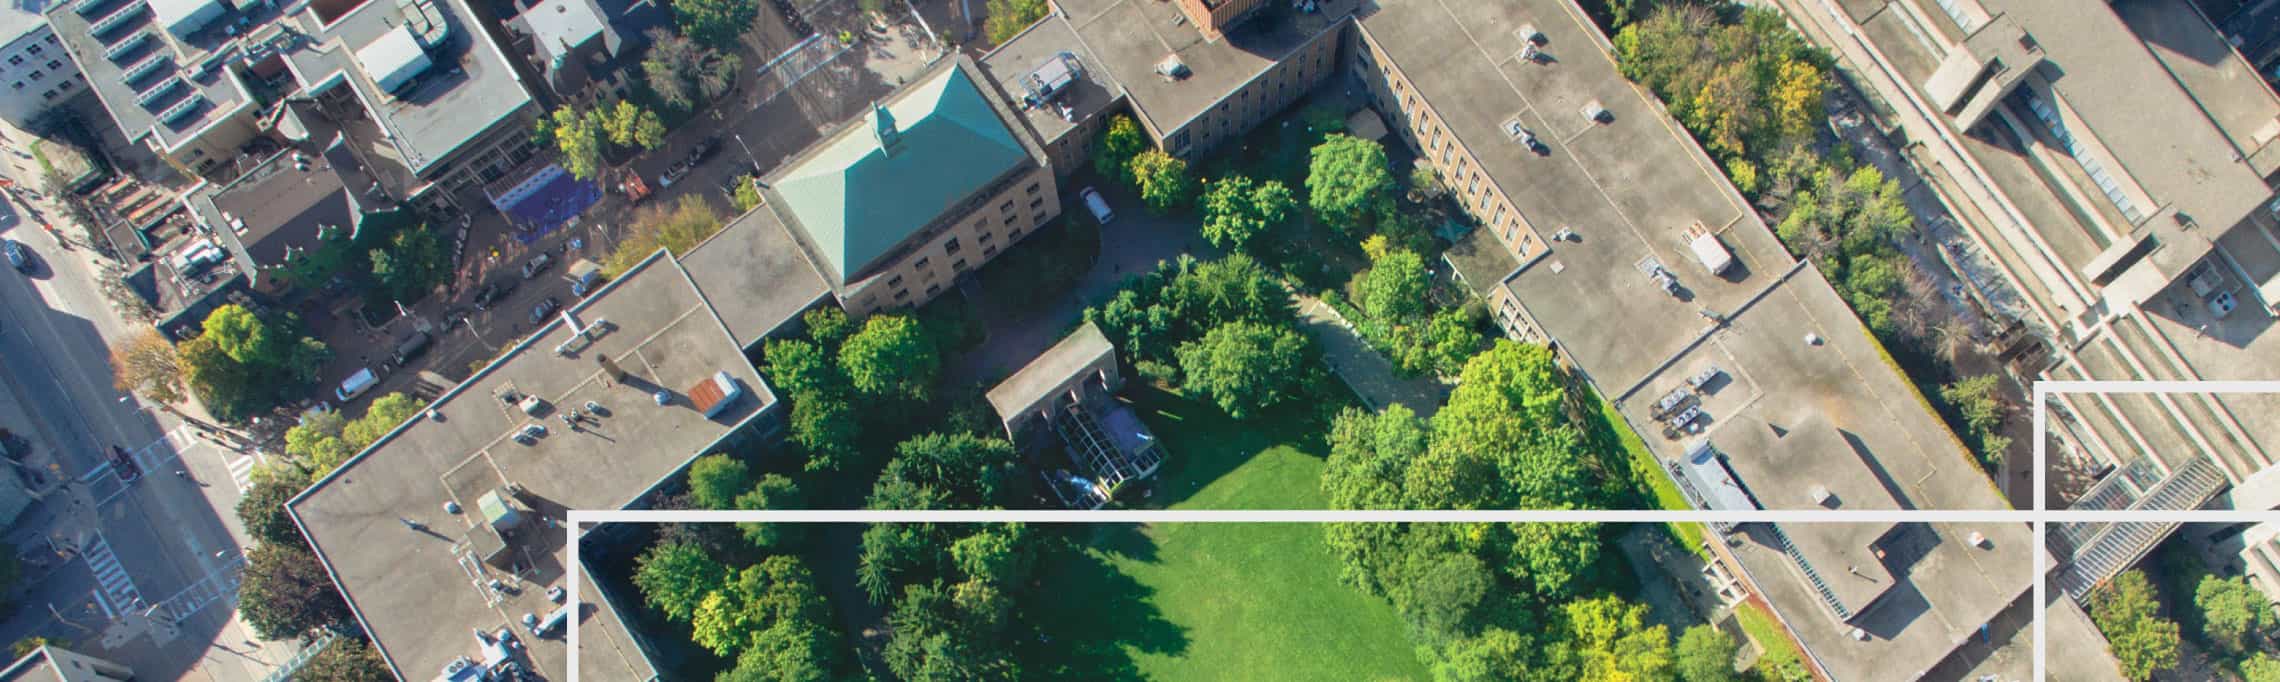 aerial shot of the quad, with transparent lines overlaid on top